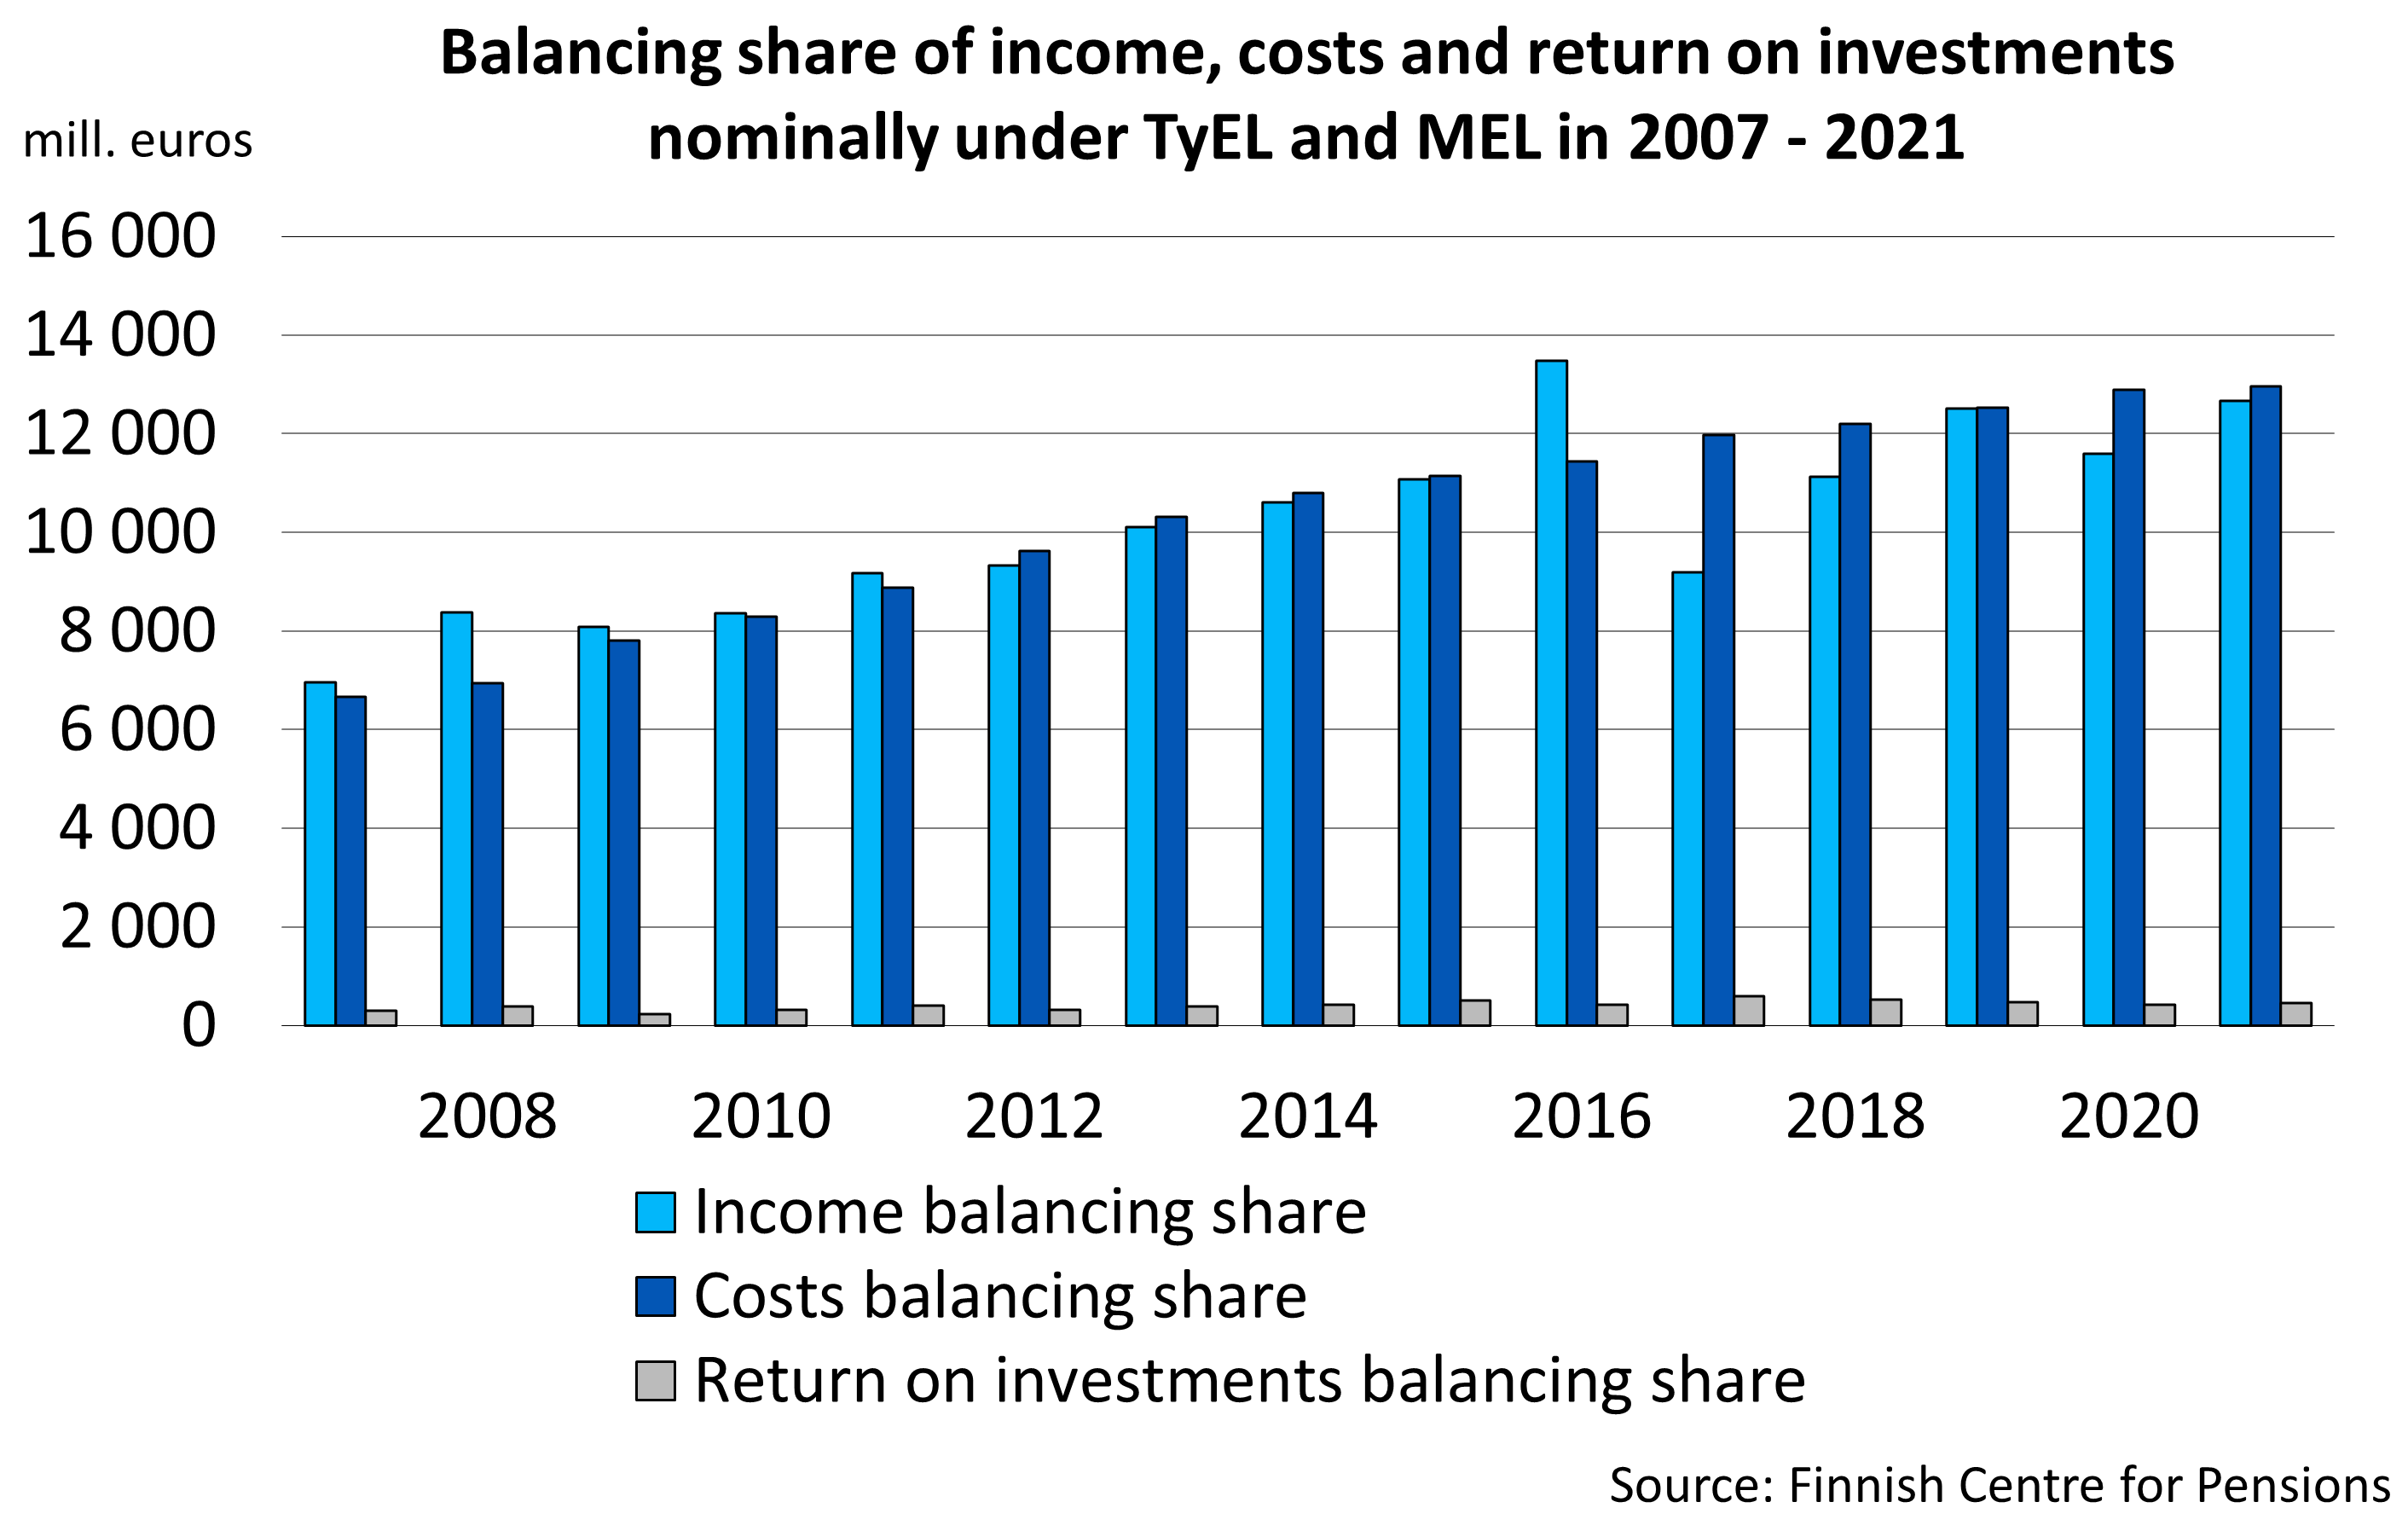 Balancing share of income, costs and return on investments nominally under TyEL and MEL in 2007 - 2020